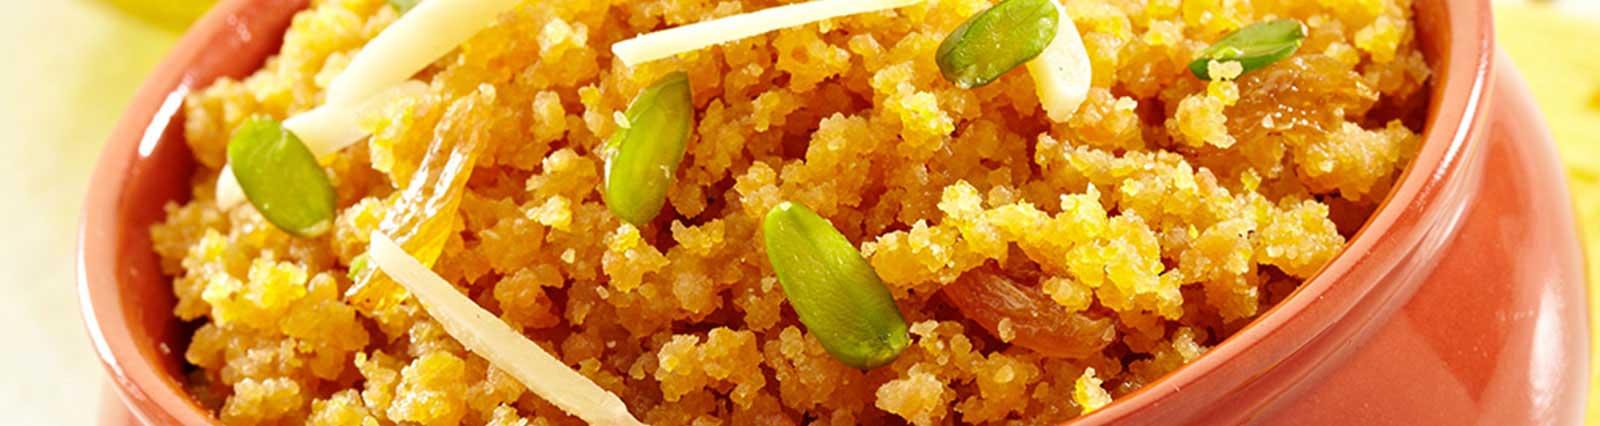 How to Make Moong Daal Halwa